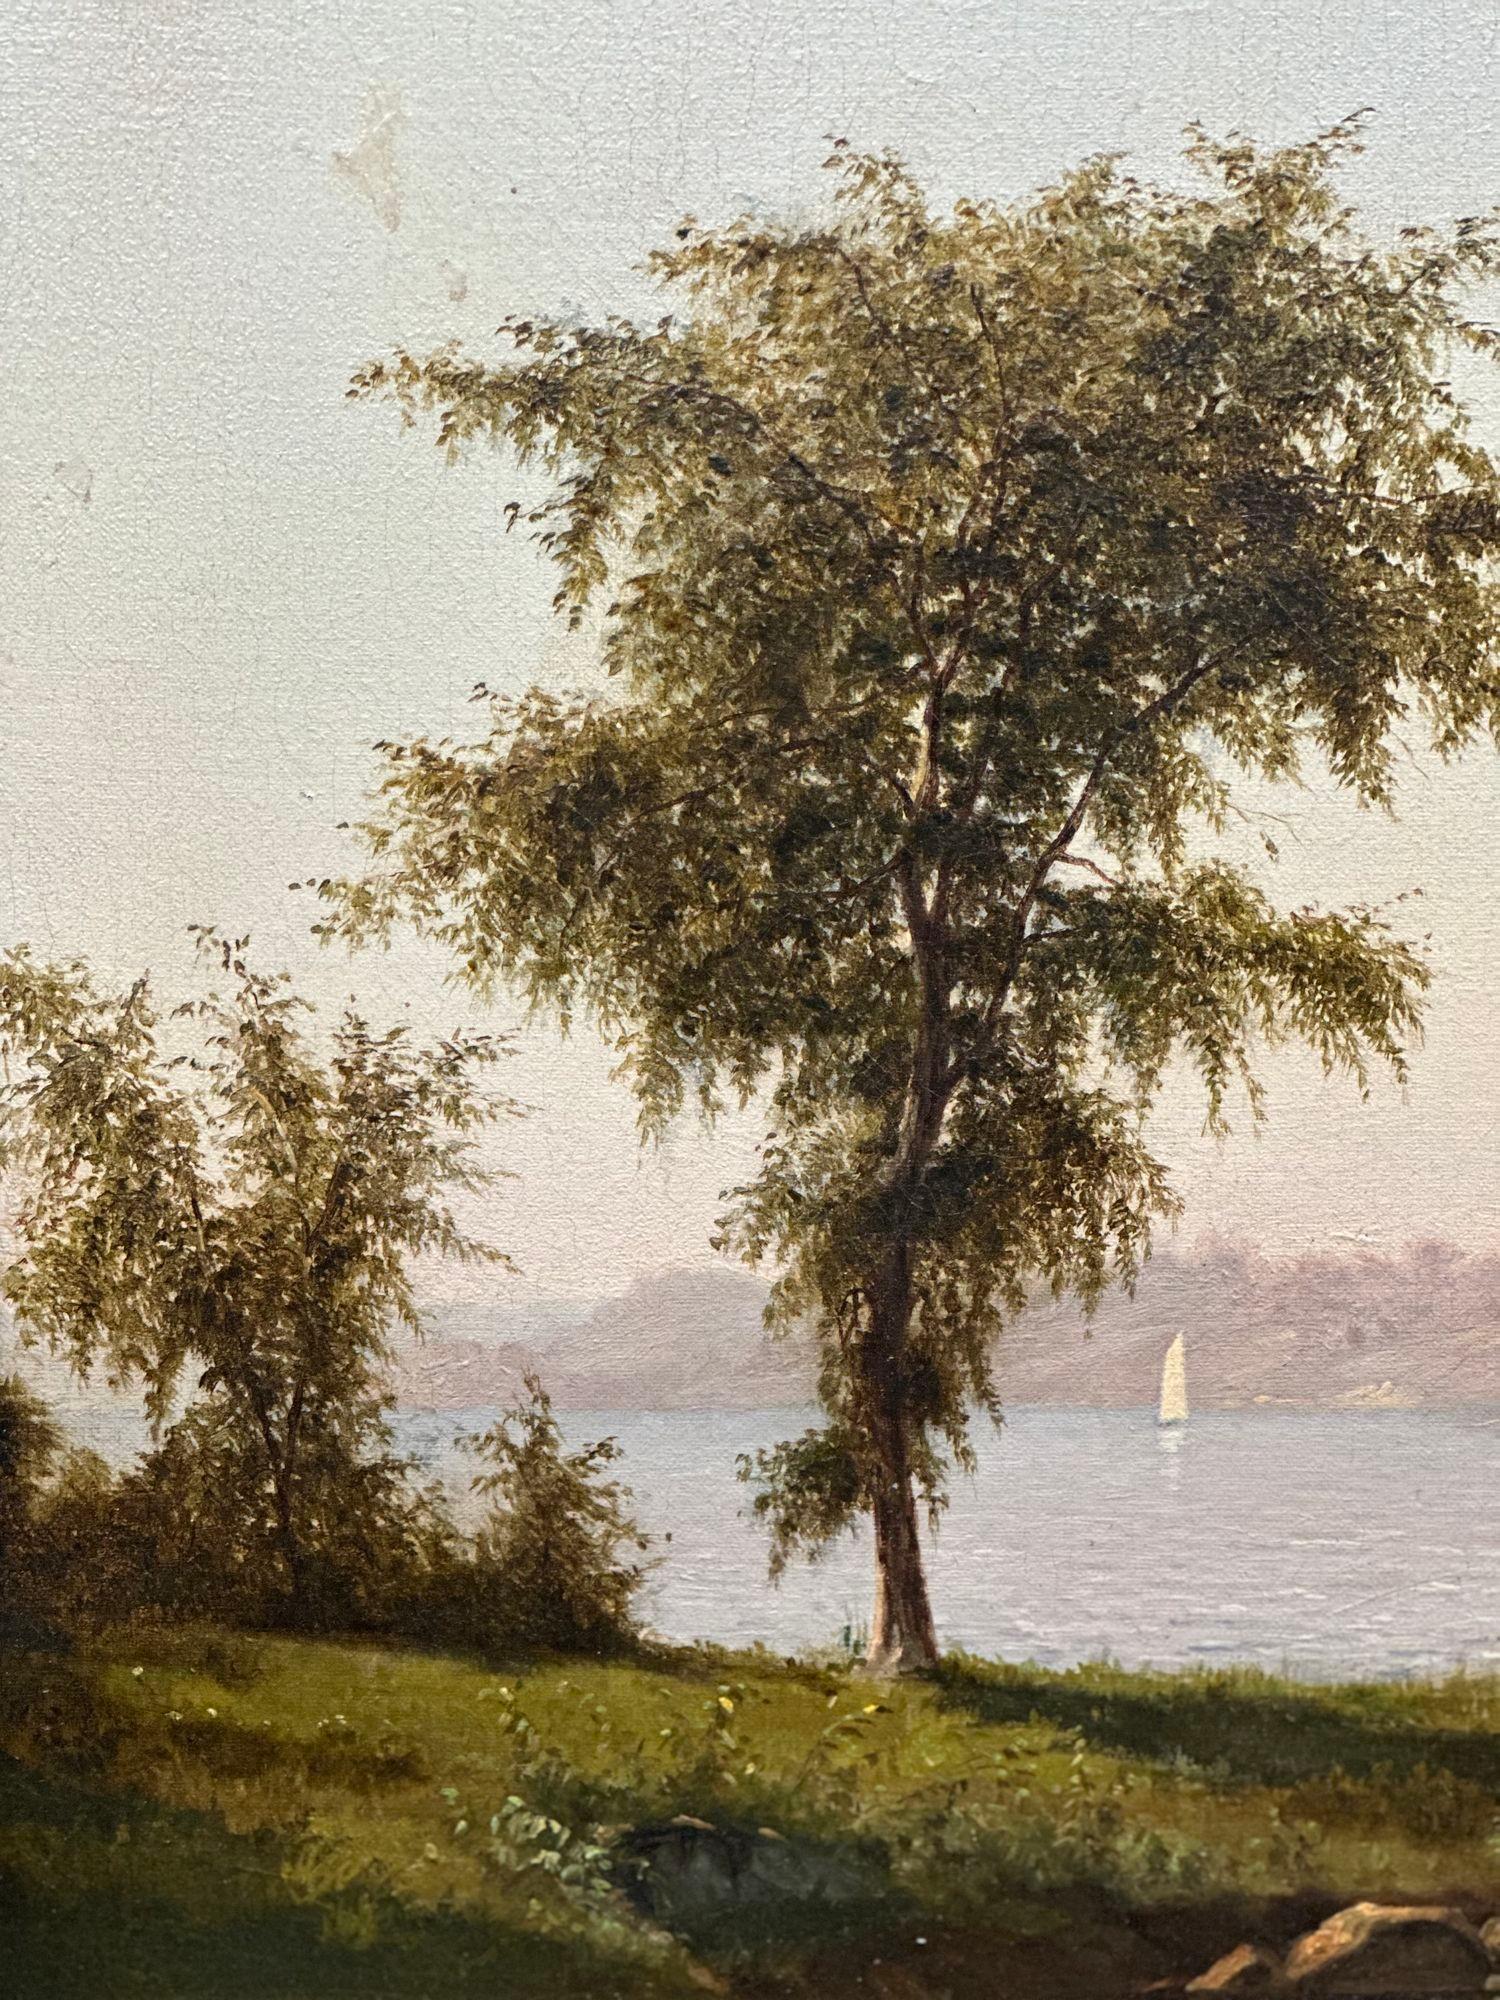 Traditional oil on canvas painting by John Williamson, titled 'Hudson River' and dated 1865, depicts a fisherman with cattle next to the river. Protected by a giltwood frame.
Dimensions:
15.5